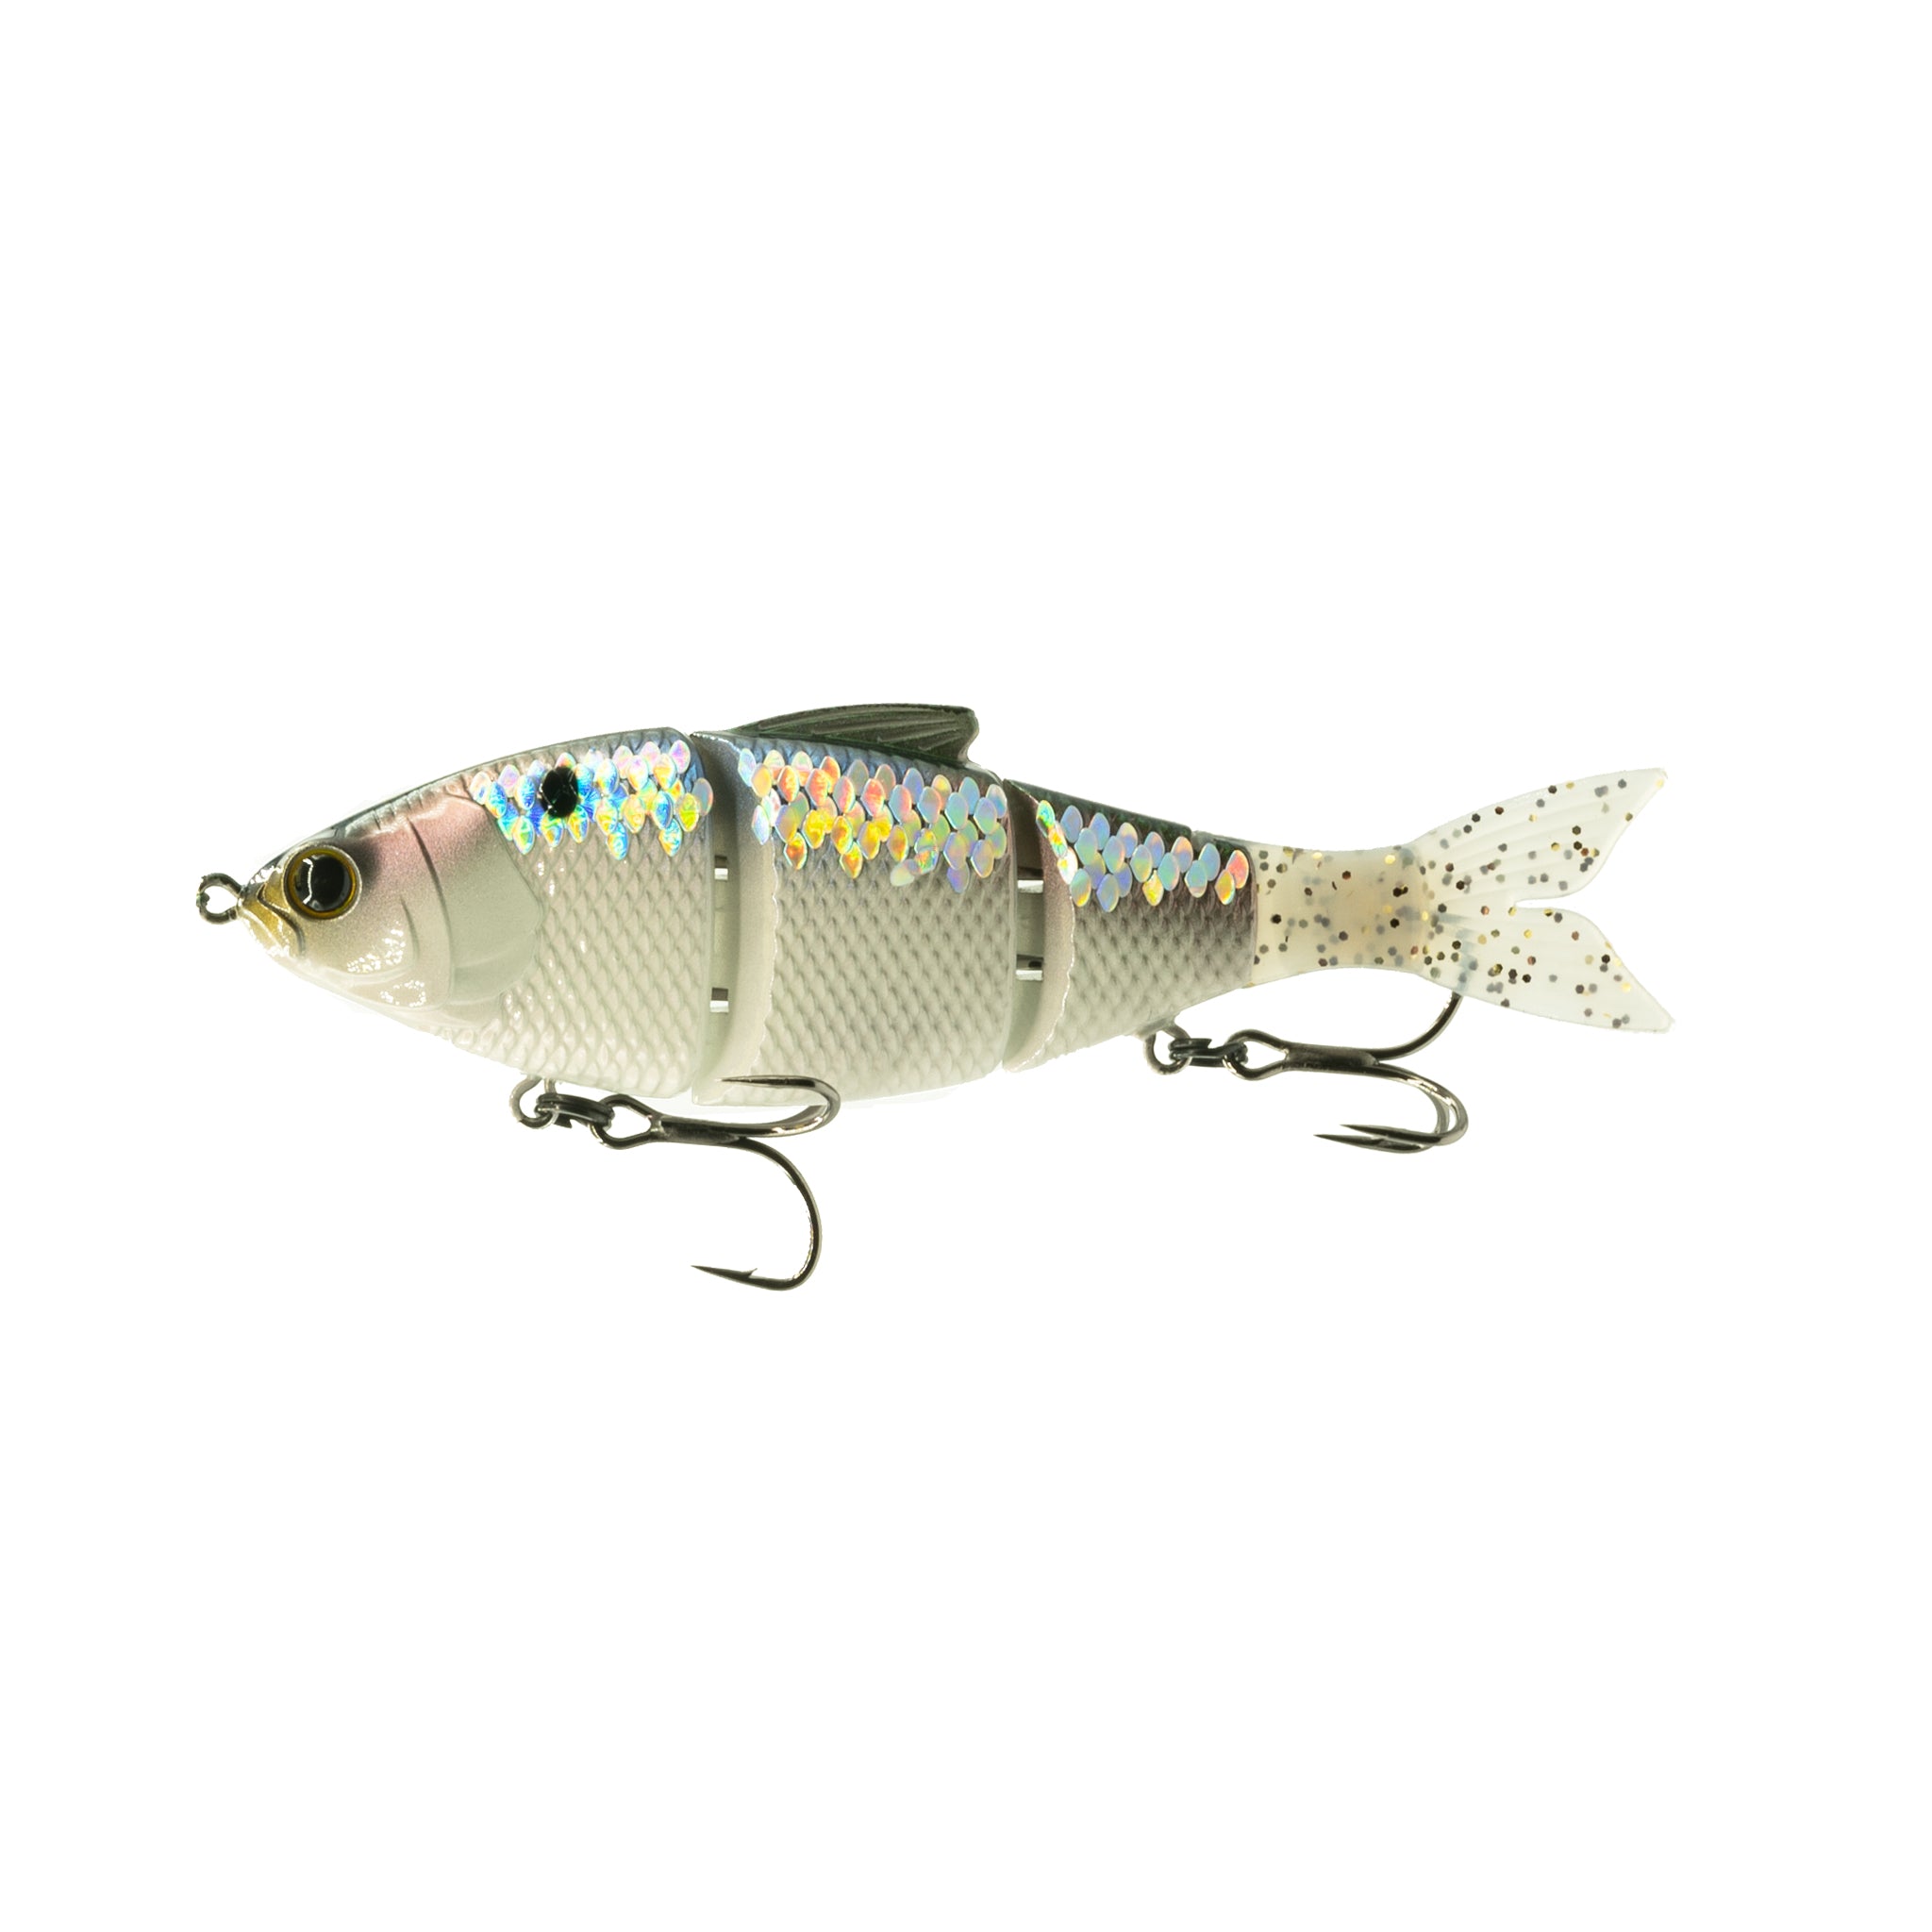 New Soft Plastic Swimbaits from 6th Sense Fishing Products - 6th